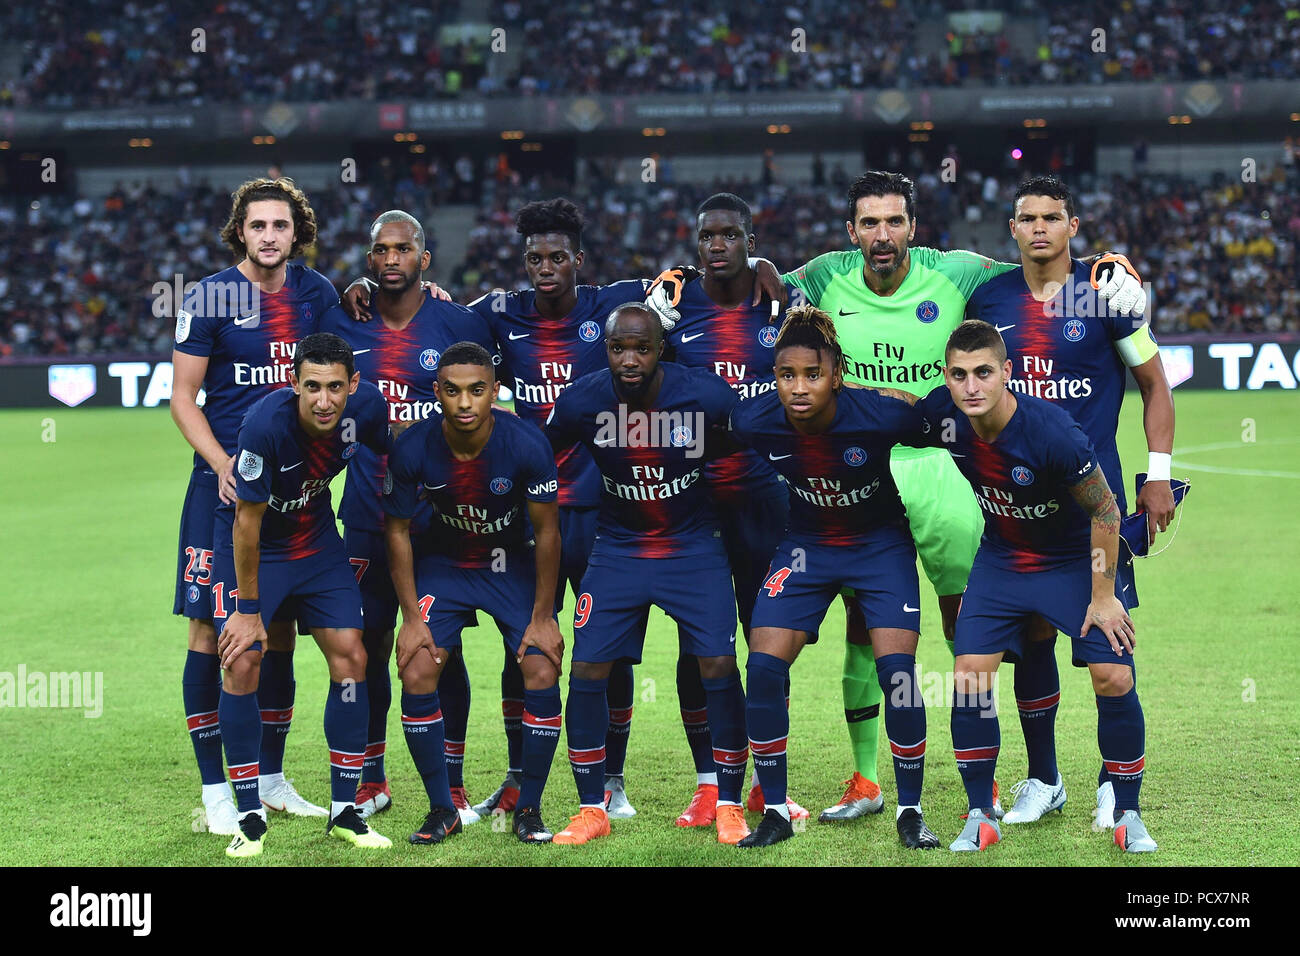 Shenzhen, China's Guangdong Province. 4th Aug, 2018. Players of Paris Saint-Germain line up before the French Trophy of Champions football match between Monaco and Paris Saint-Germain at Universiade Stadium in Shenzhen, south China's Guangdong Province, on Aug. 4, 2018. Paris Saint-Germain won 4-0. Credit: Mao Siqian/Xinhua/Alamy Live News Stock Photo